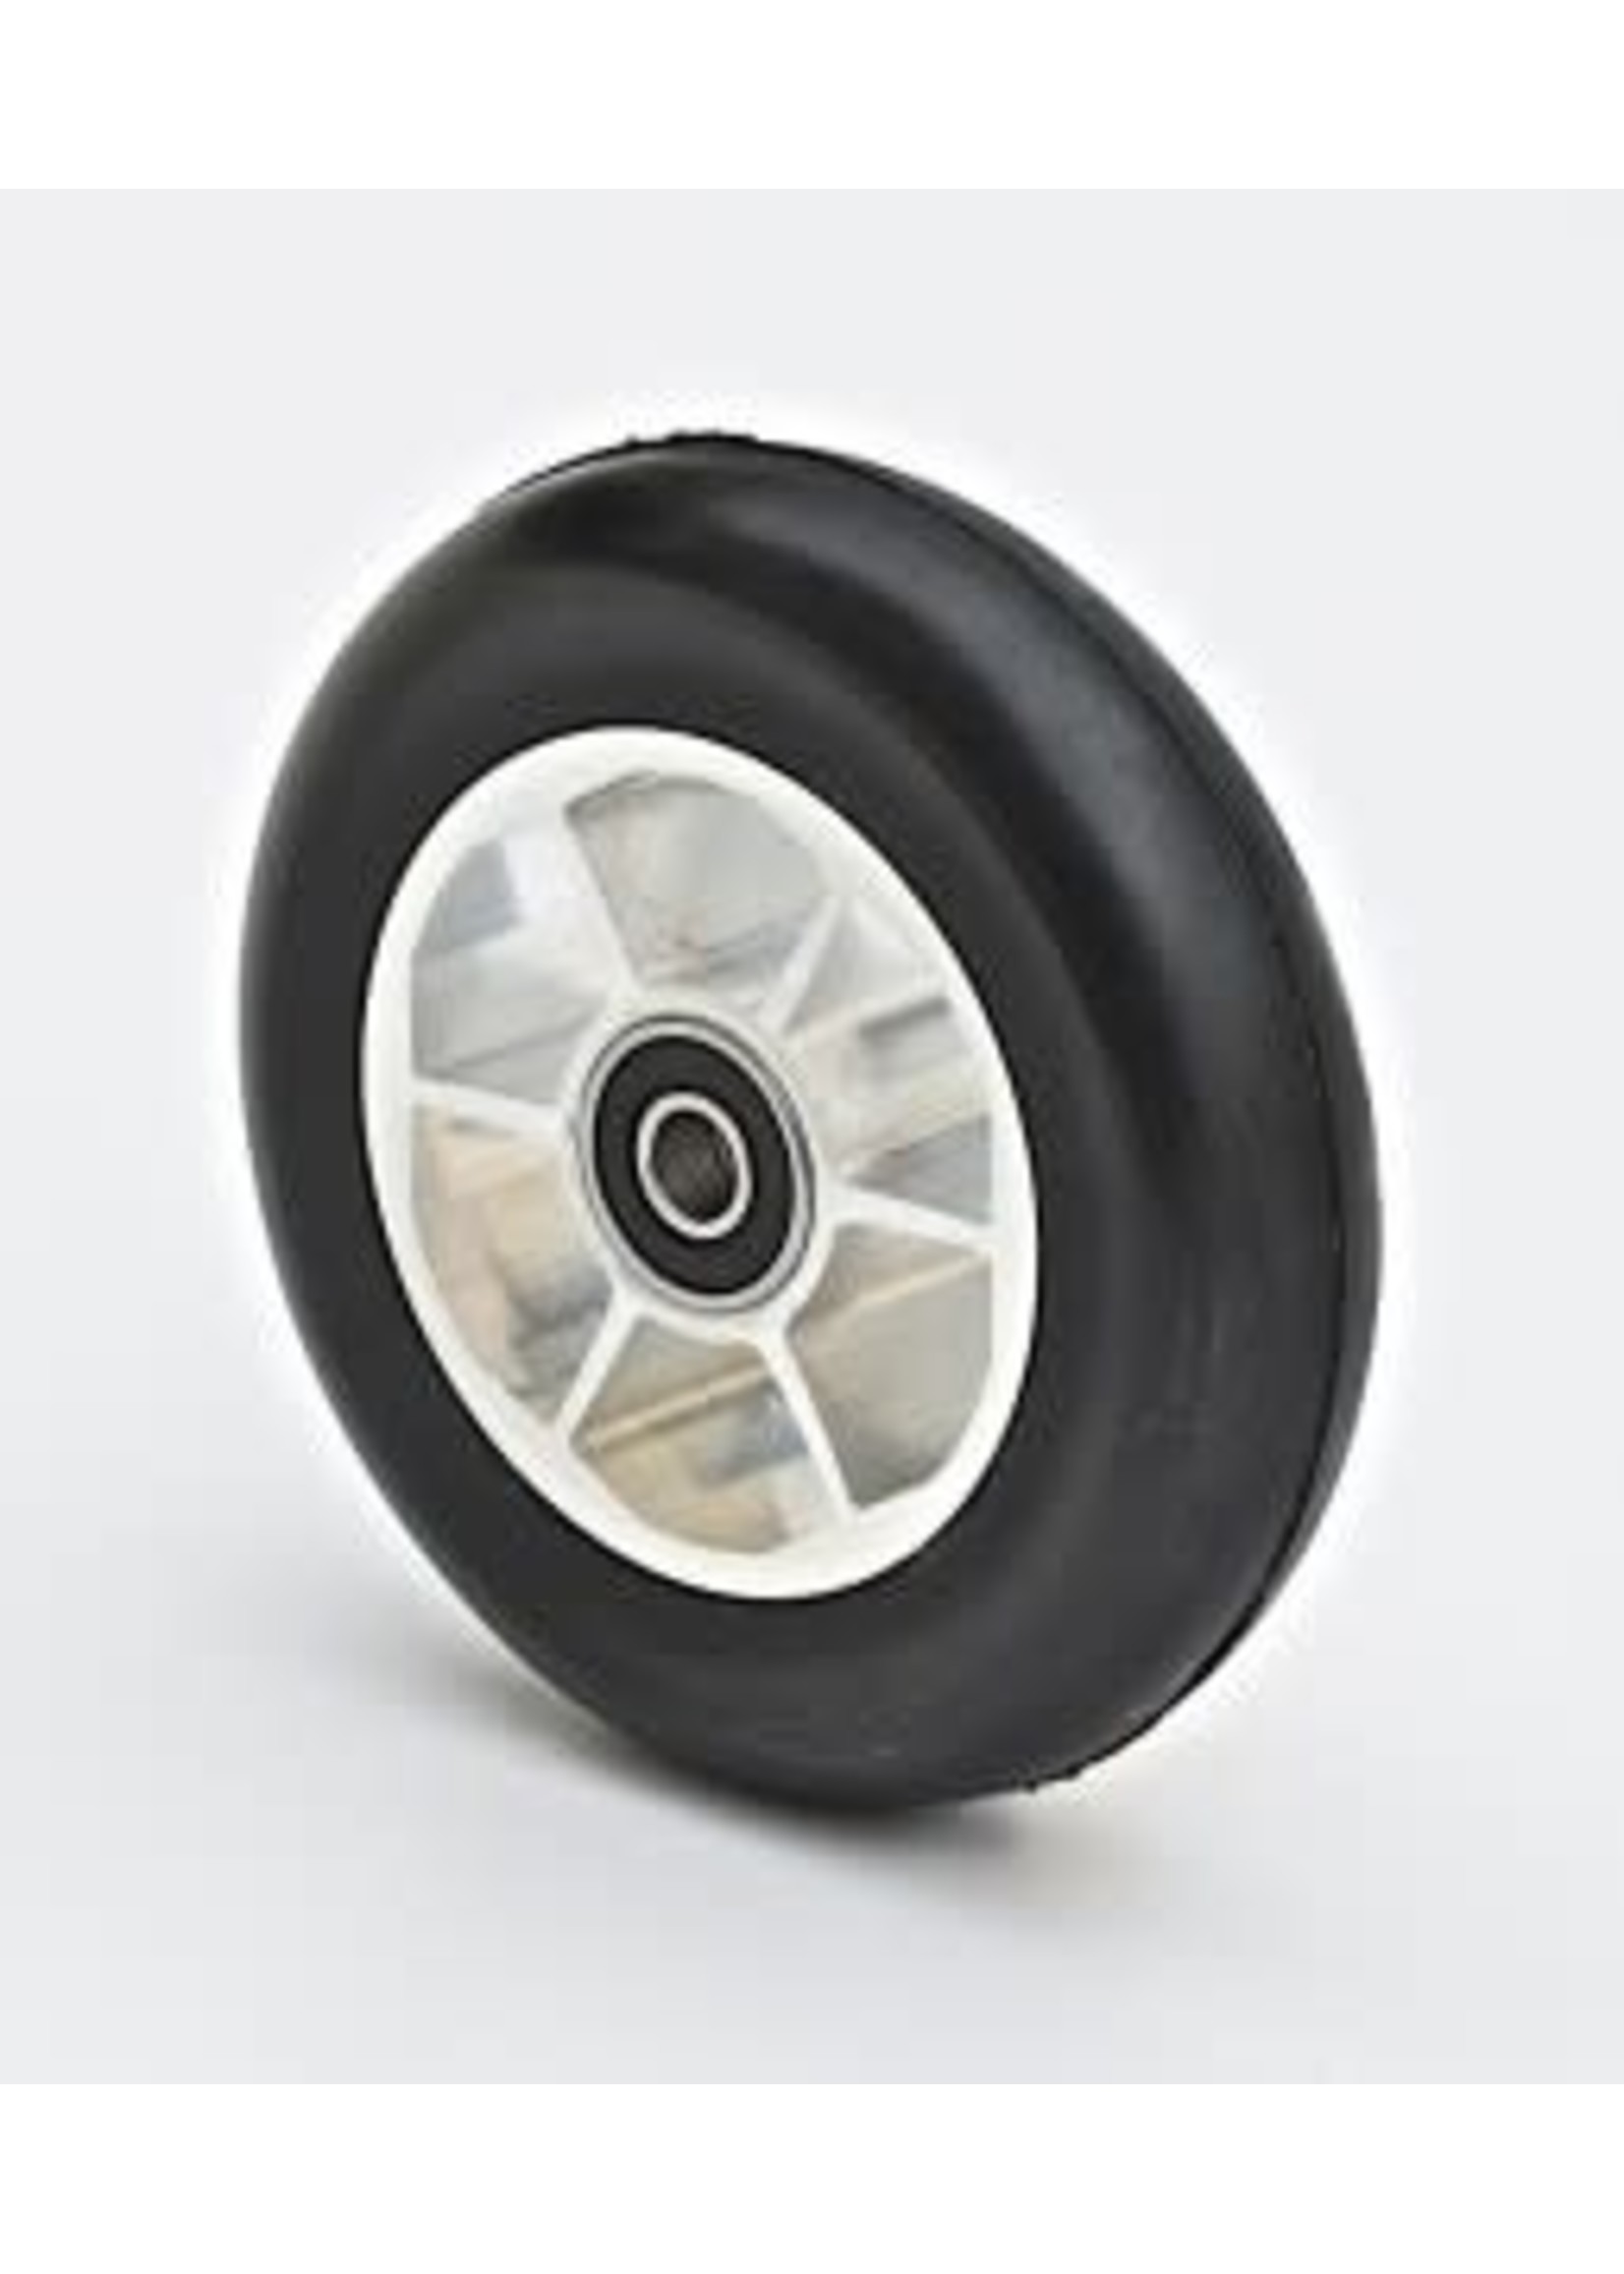 V2 98x24mm Fast Wheel (roue 98 rapide)